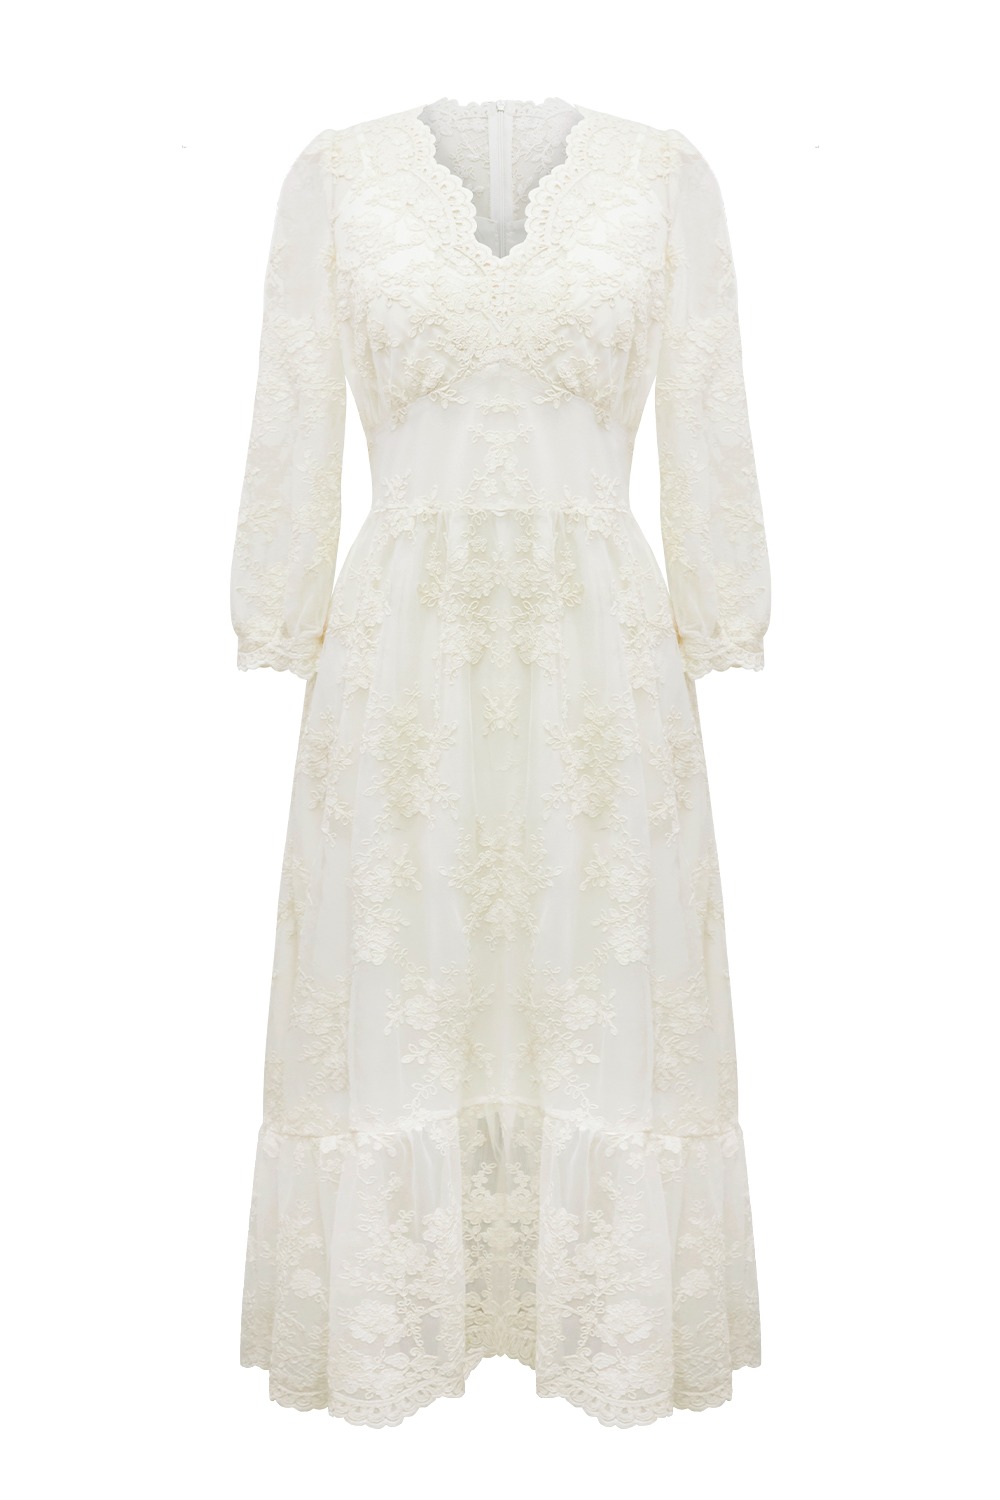 New bloom lace dress (Ivory)